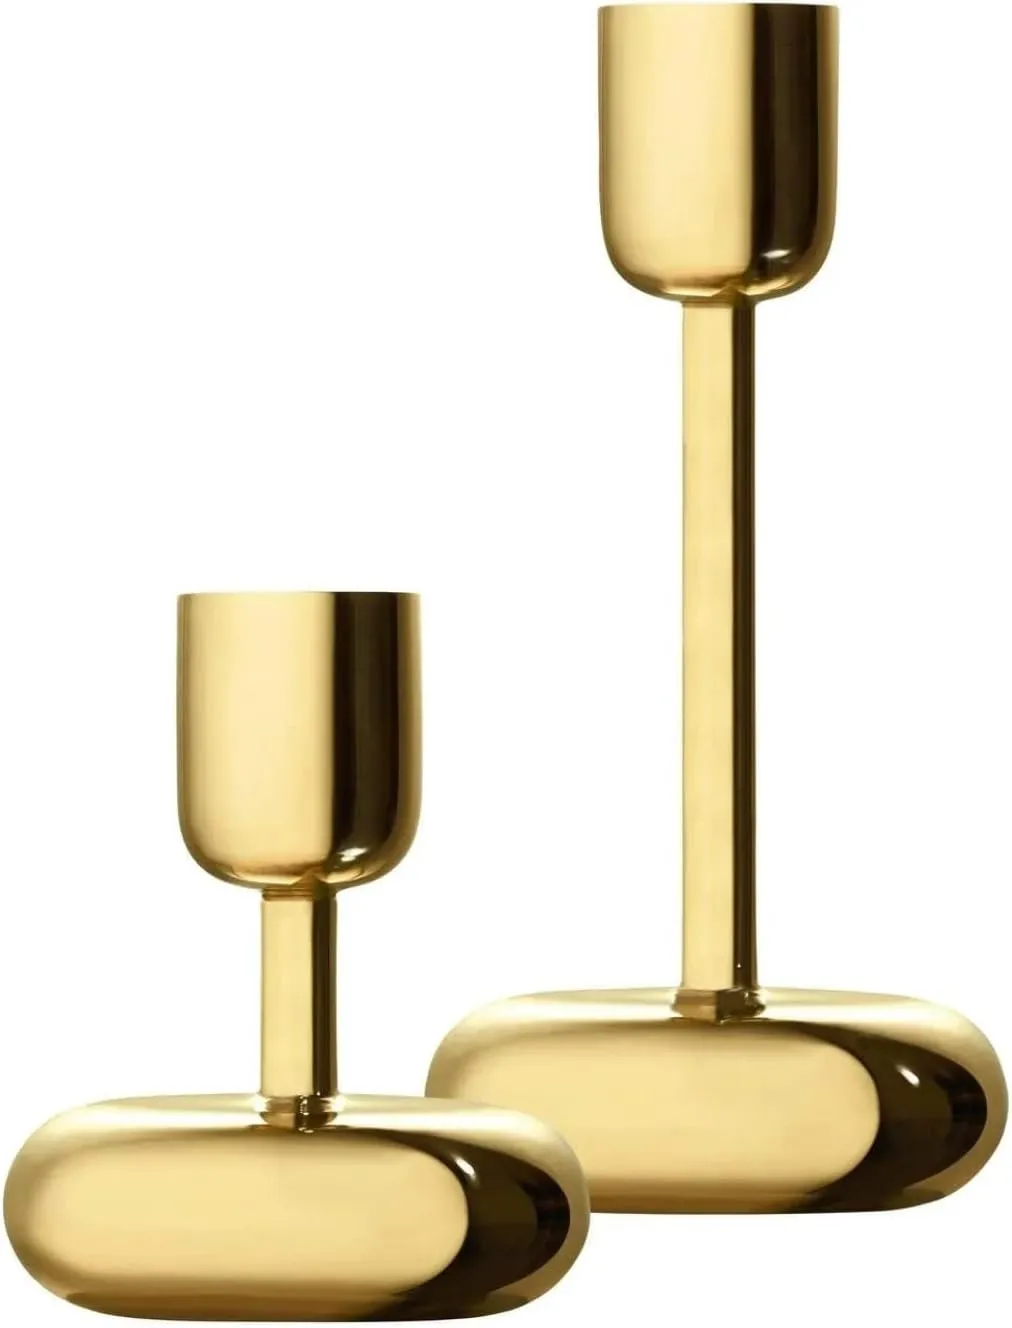 Nappula brass candle holder gift pack of 2 pieces